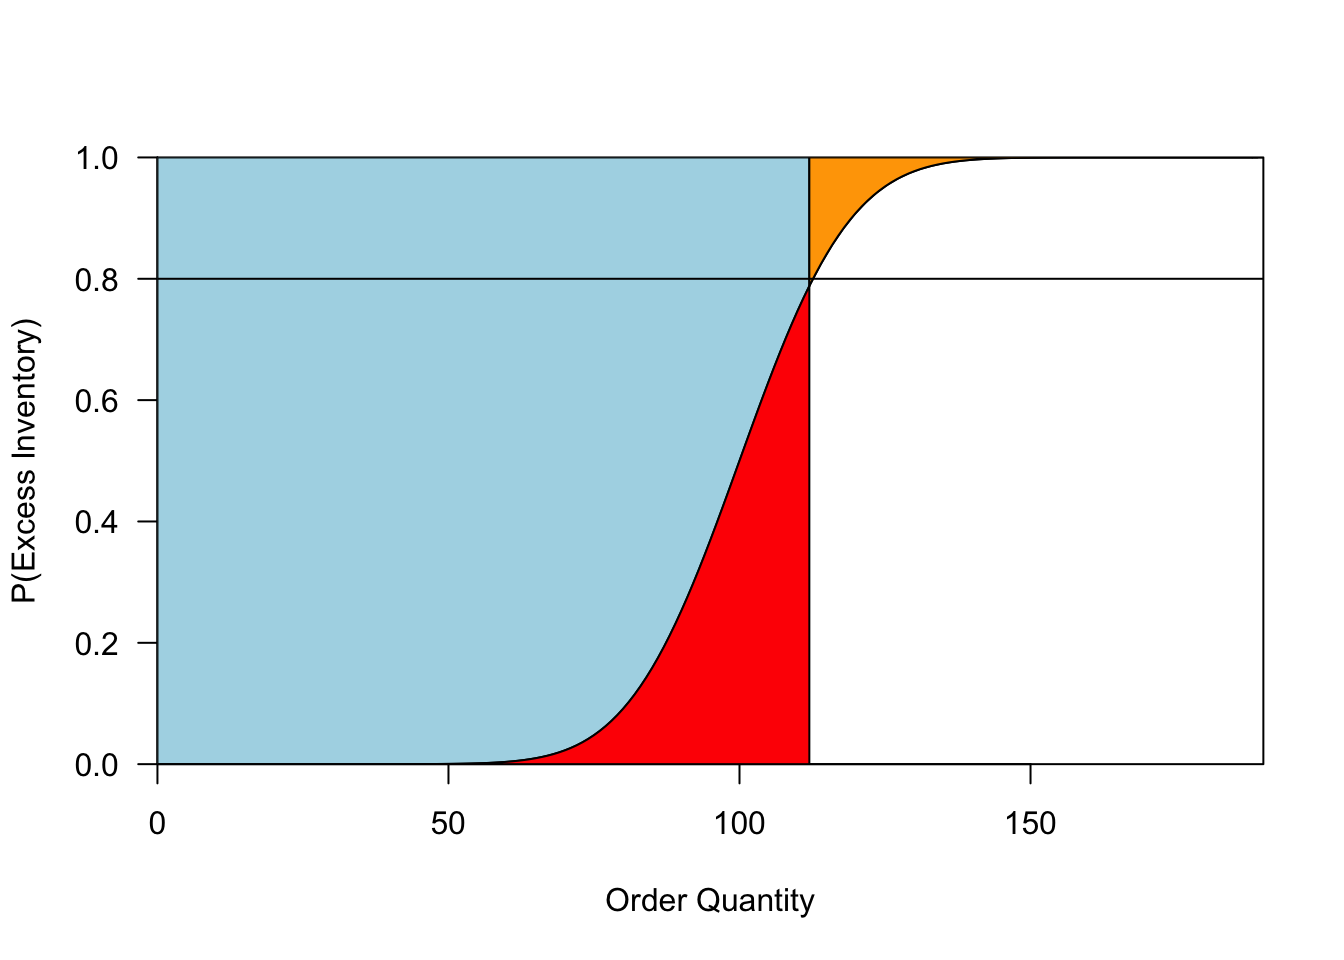 Outcomes when demand is uncertain (left) and more certain (right). When ordering optimally, the probability of having _some_ overage is the same in both cases, but the _expected_ overage and underage (in red and orange, respectively) is much lower when demand is more certain.